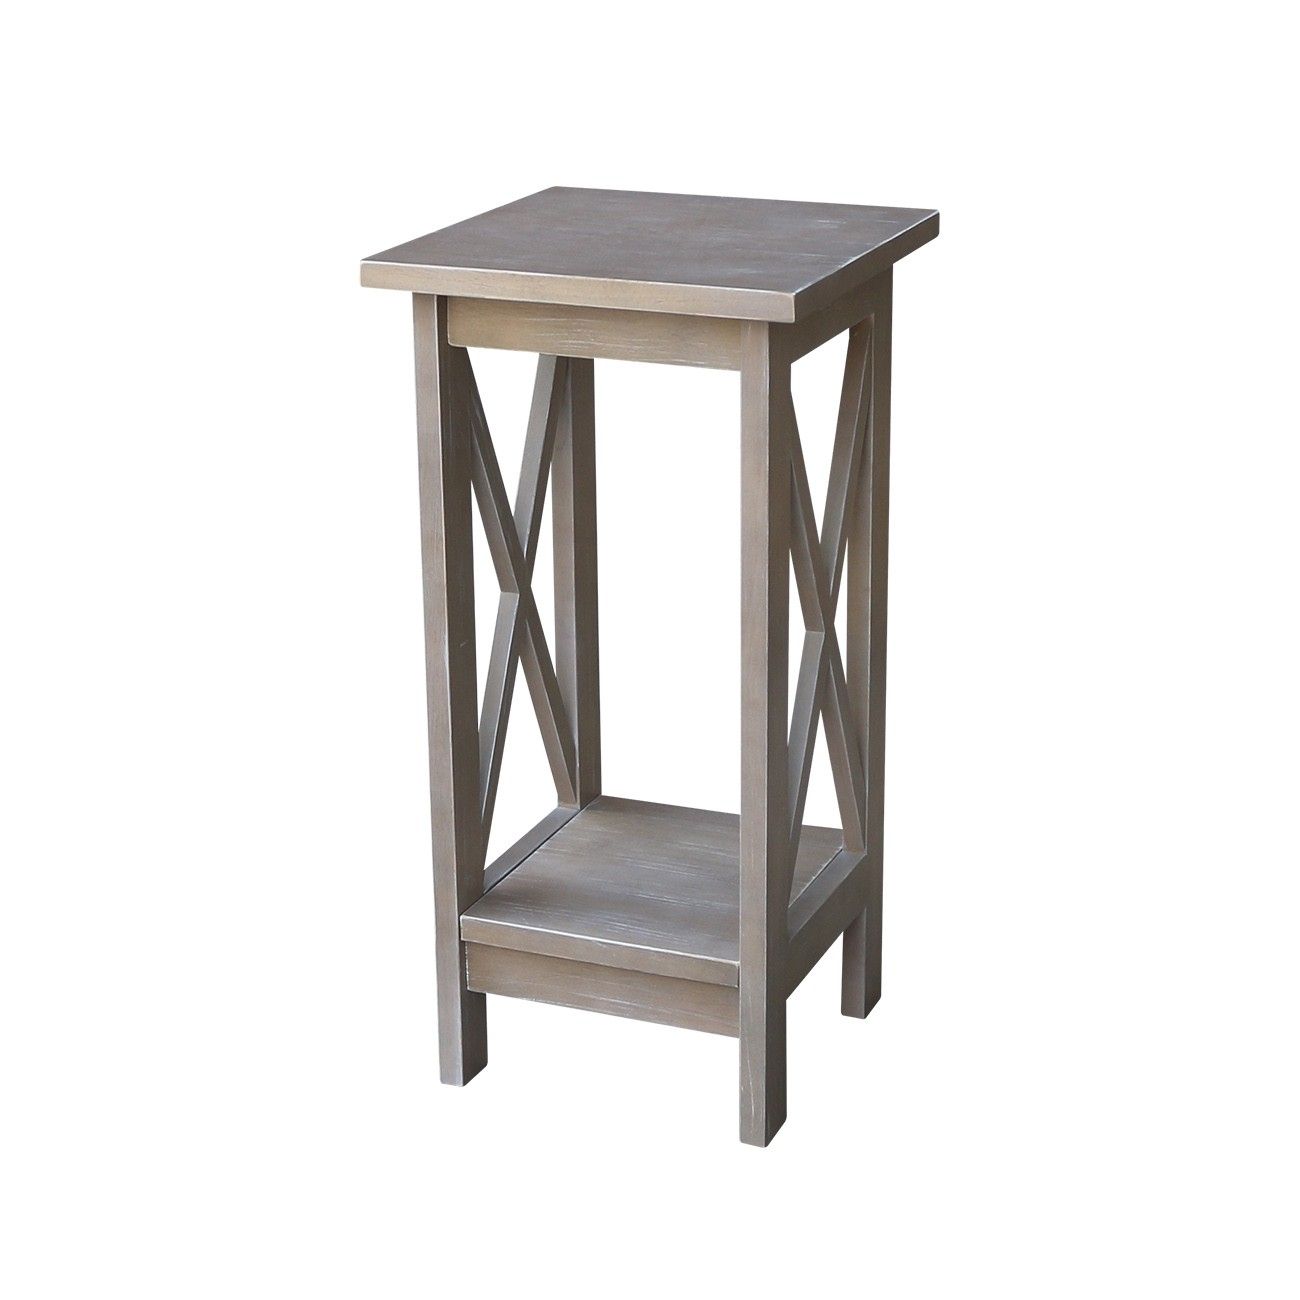 24" X Sided Plant Stand  Weathered Gray (3 Sizes Available) Pertaining To Weathered Gray Plant Stands (Photo 3 of 15)